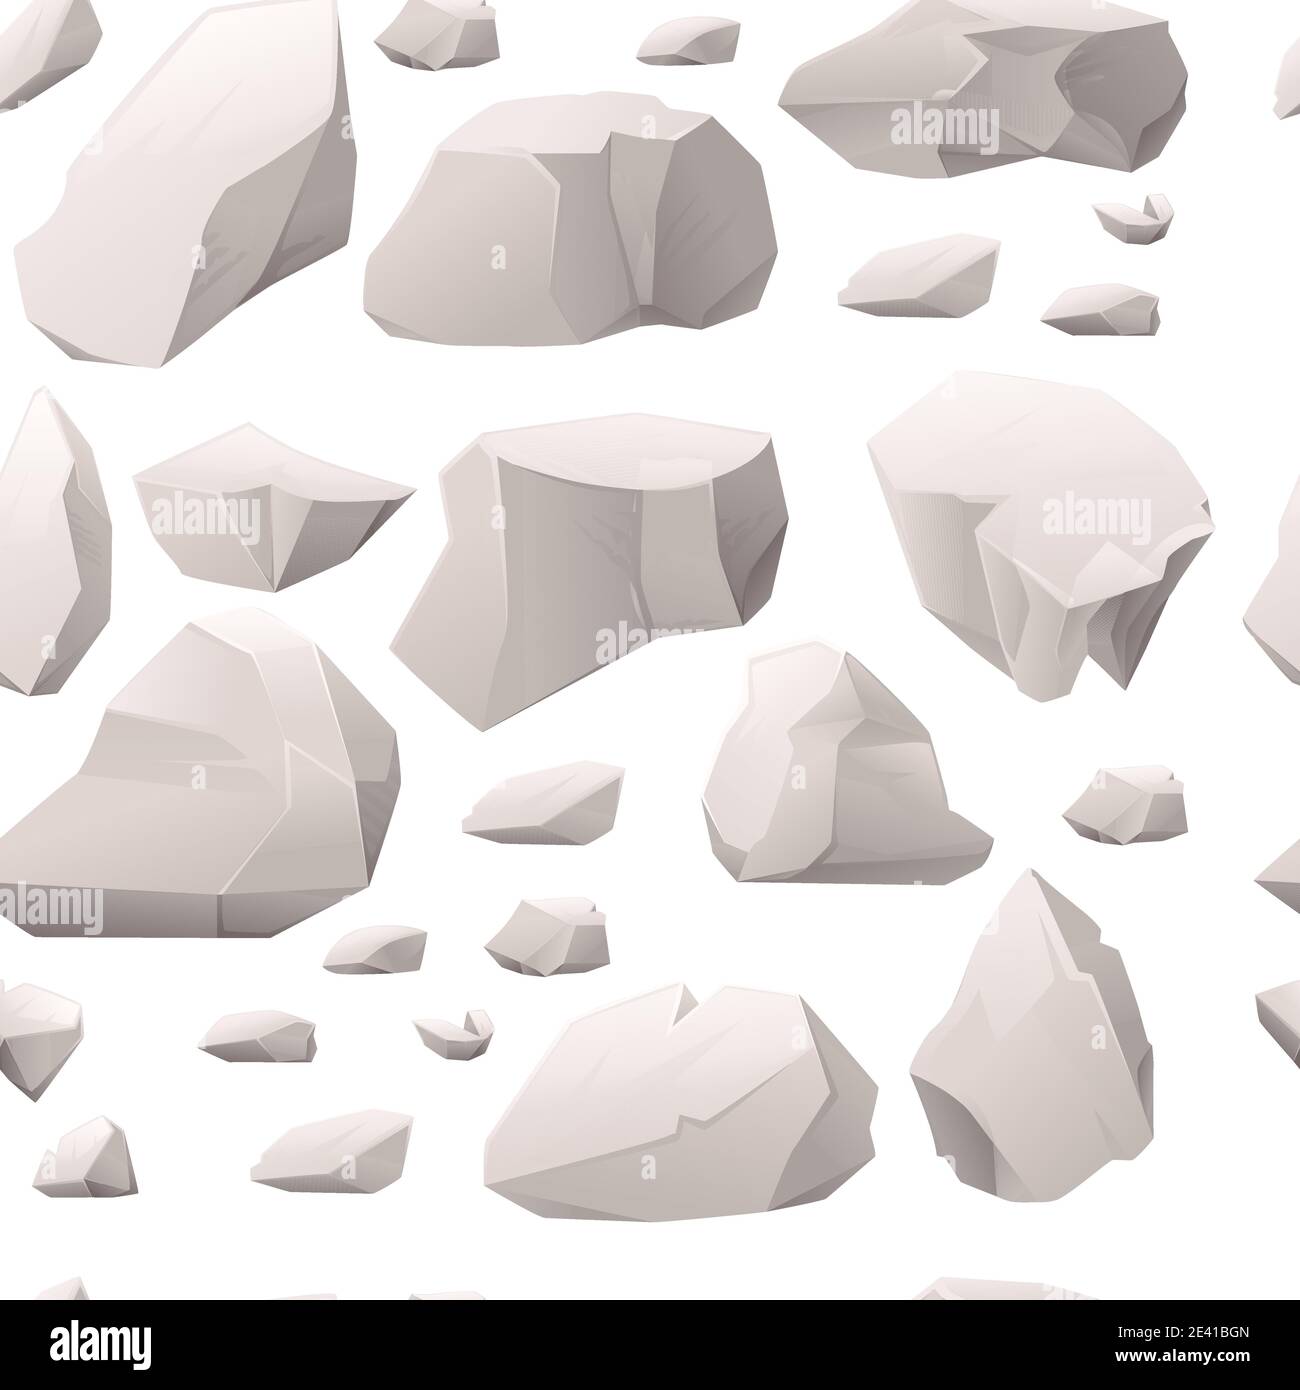 Seamless pattern of gray stones and rocks different sizes and shapes vector illustration on white background Stock Vector